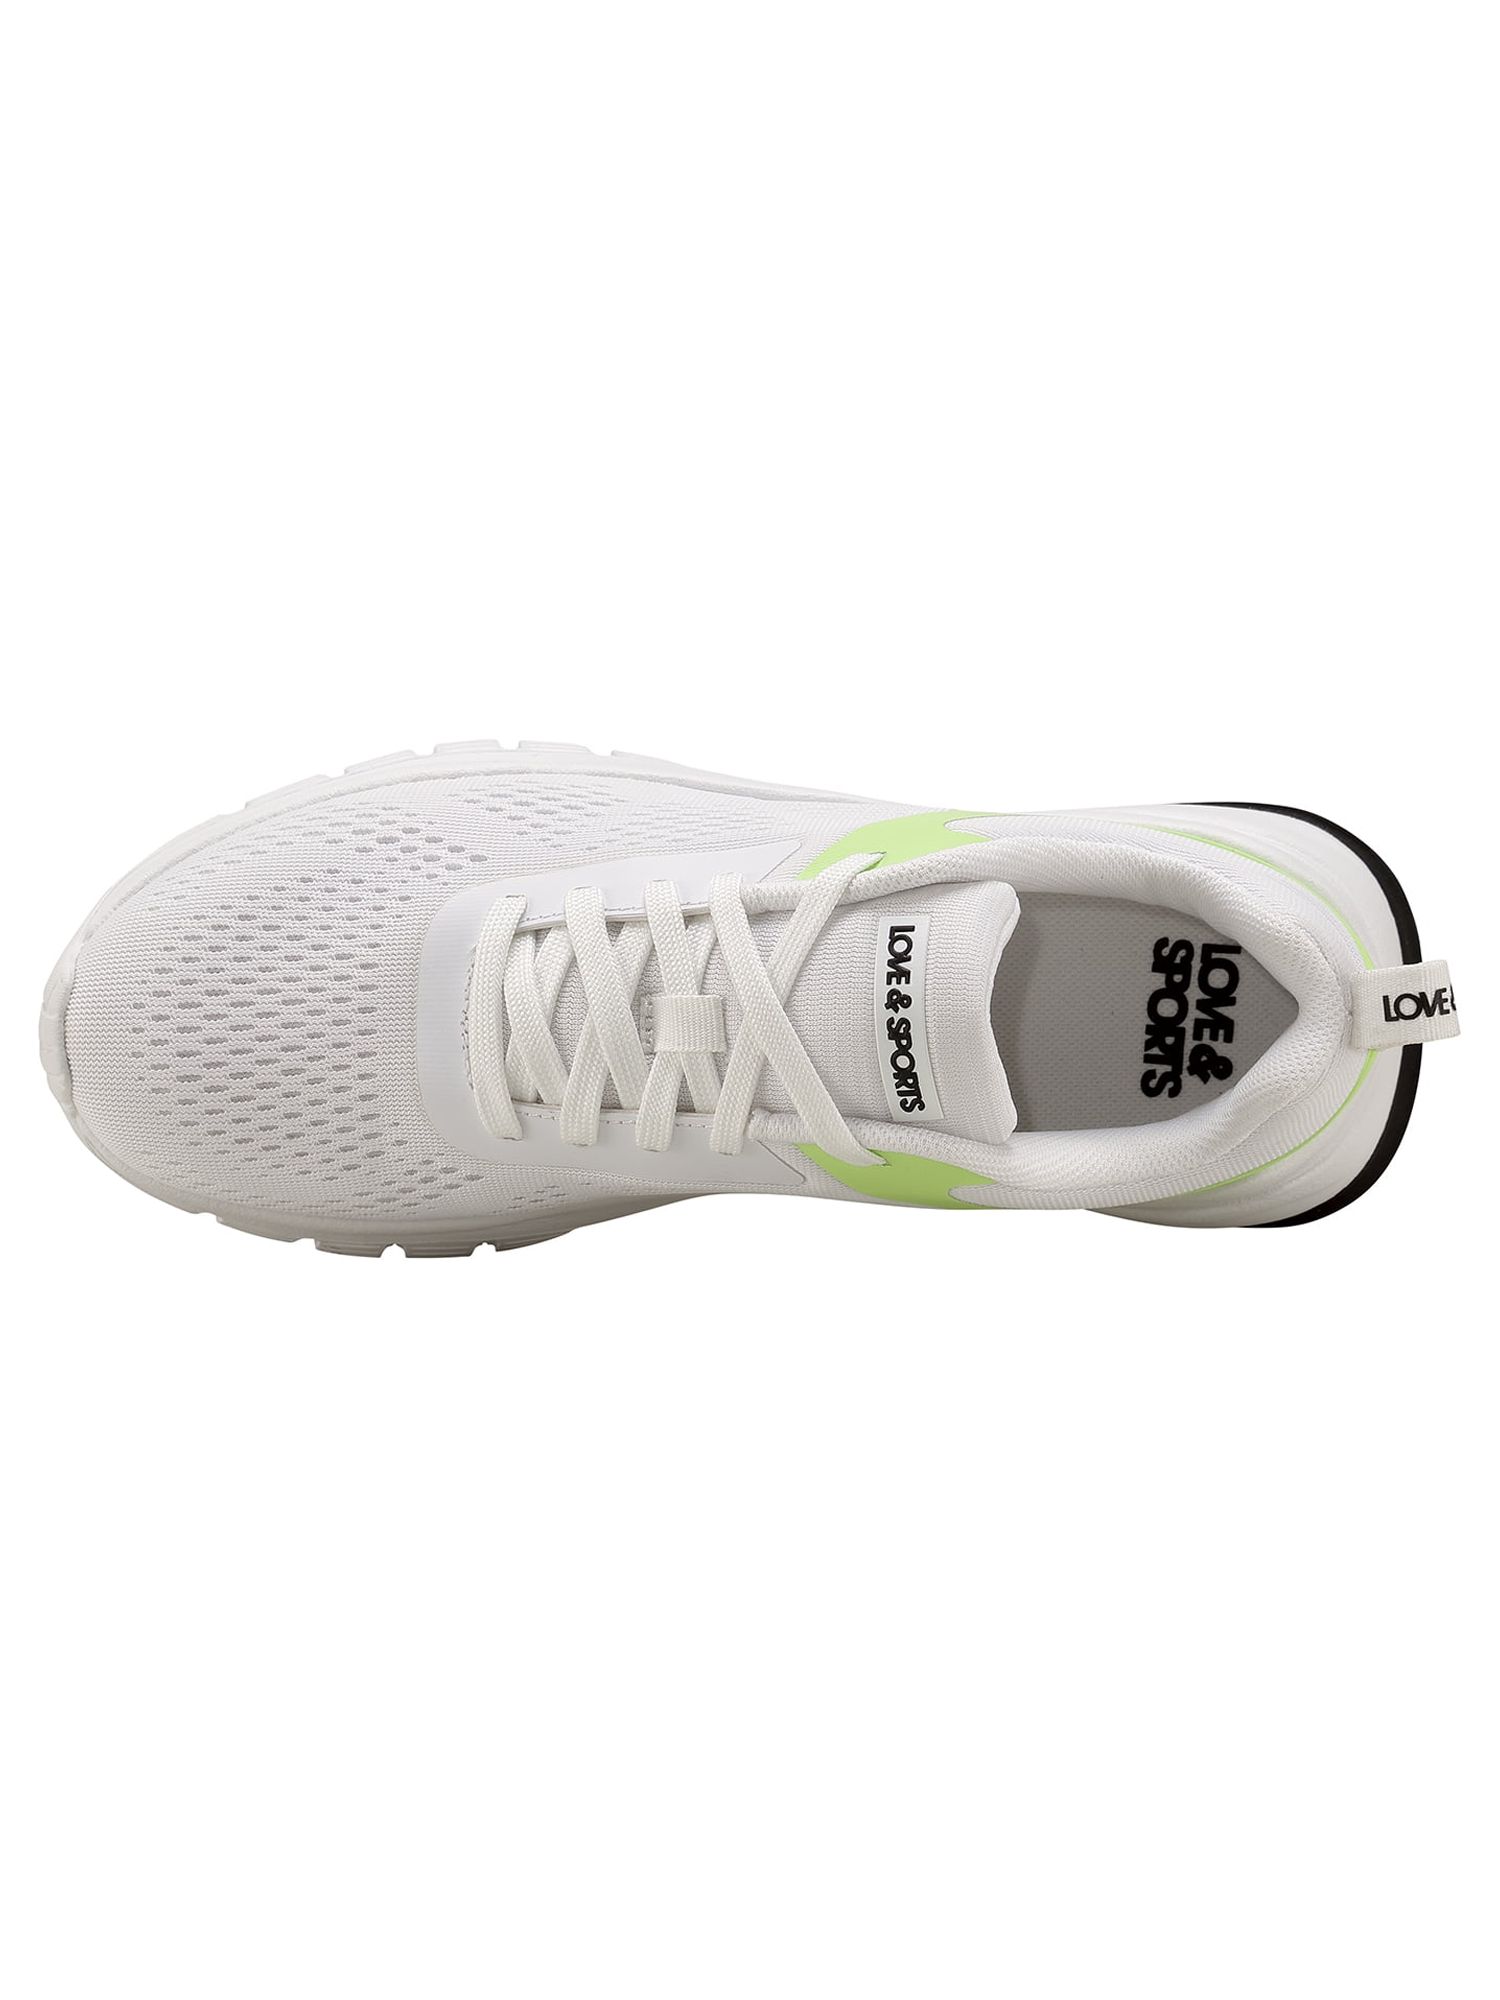 Love & Sports Women's Lace-Up Mesh Athletic Sneakers - image 3 of 8